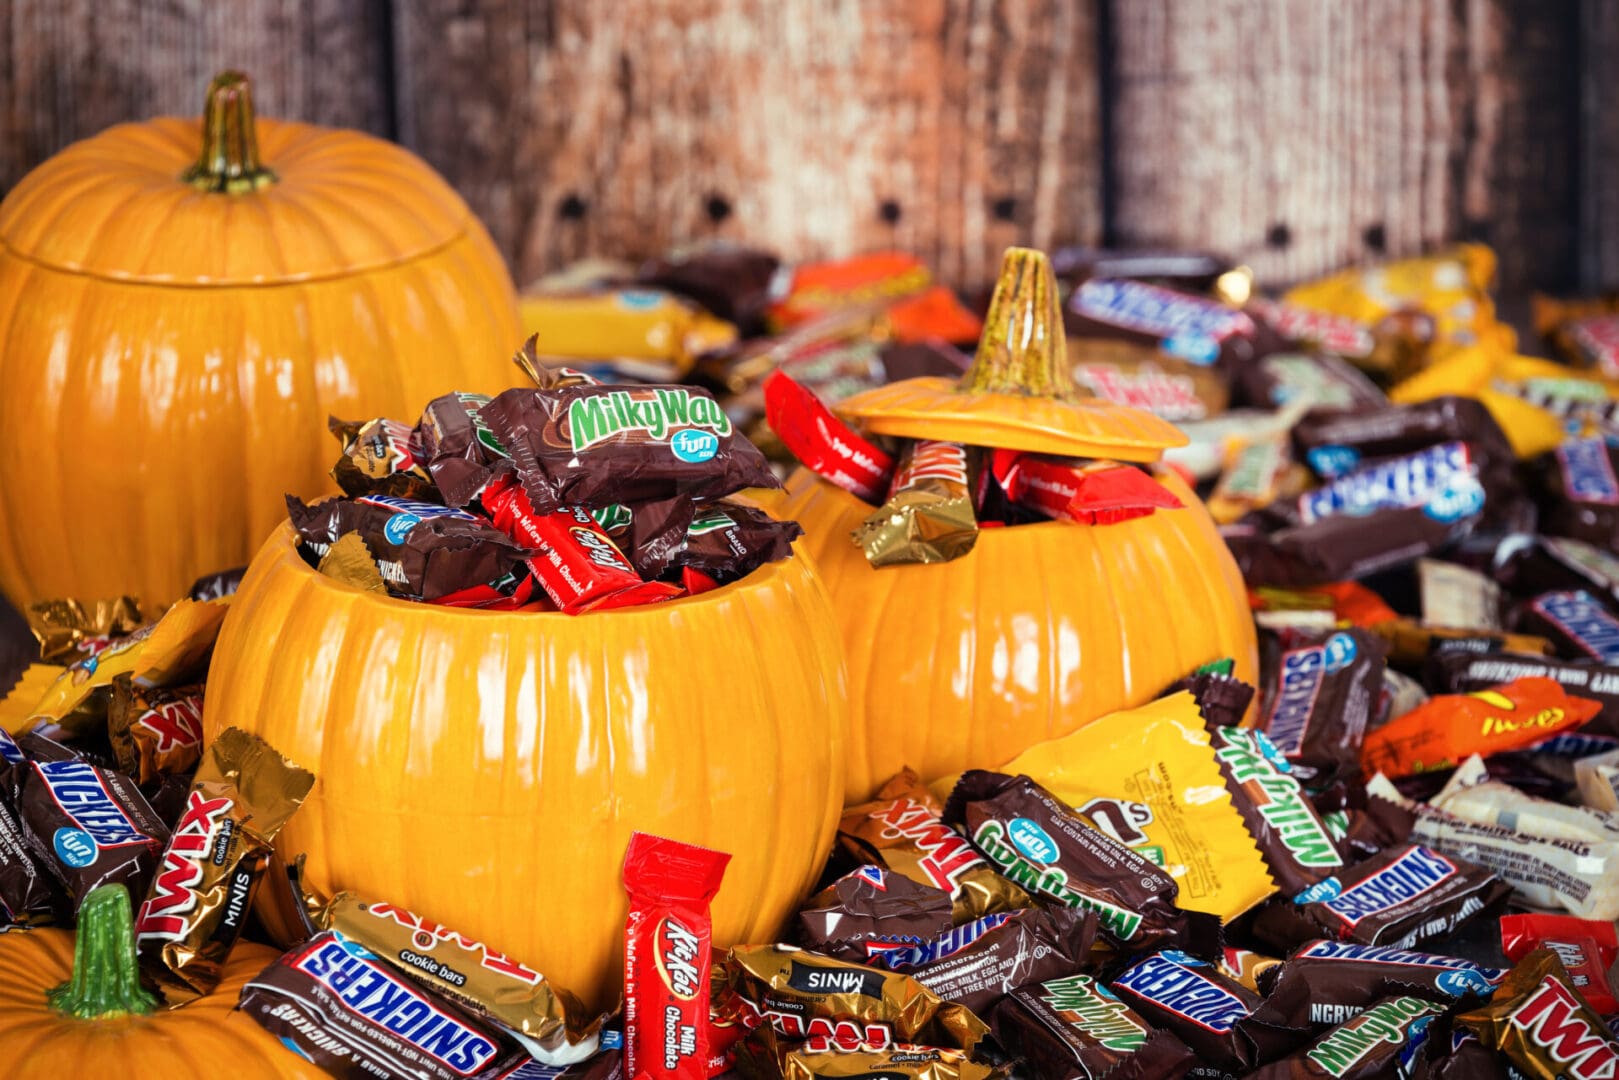 Dallas, United States - October 31, 2015: Decorative pumpkins filled with assorted Halloween chocolate candy made by Mars, Incorporated and the Hershey Company.